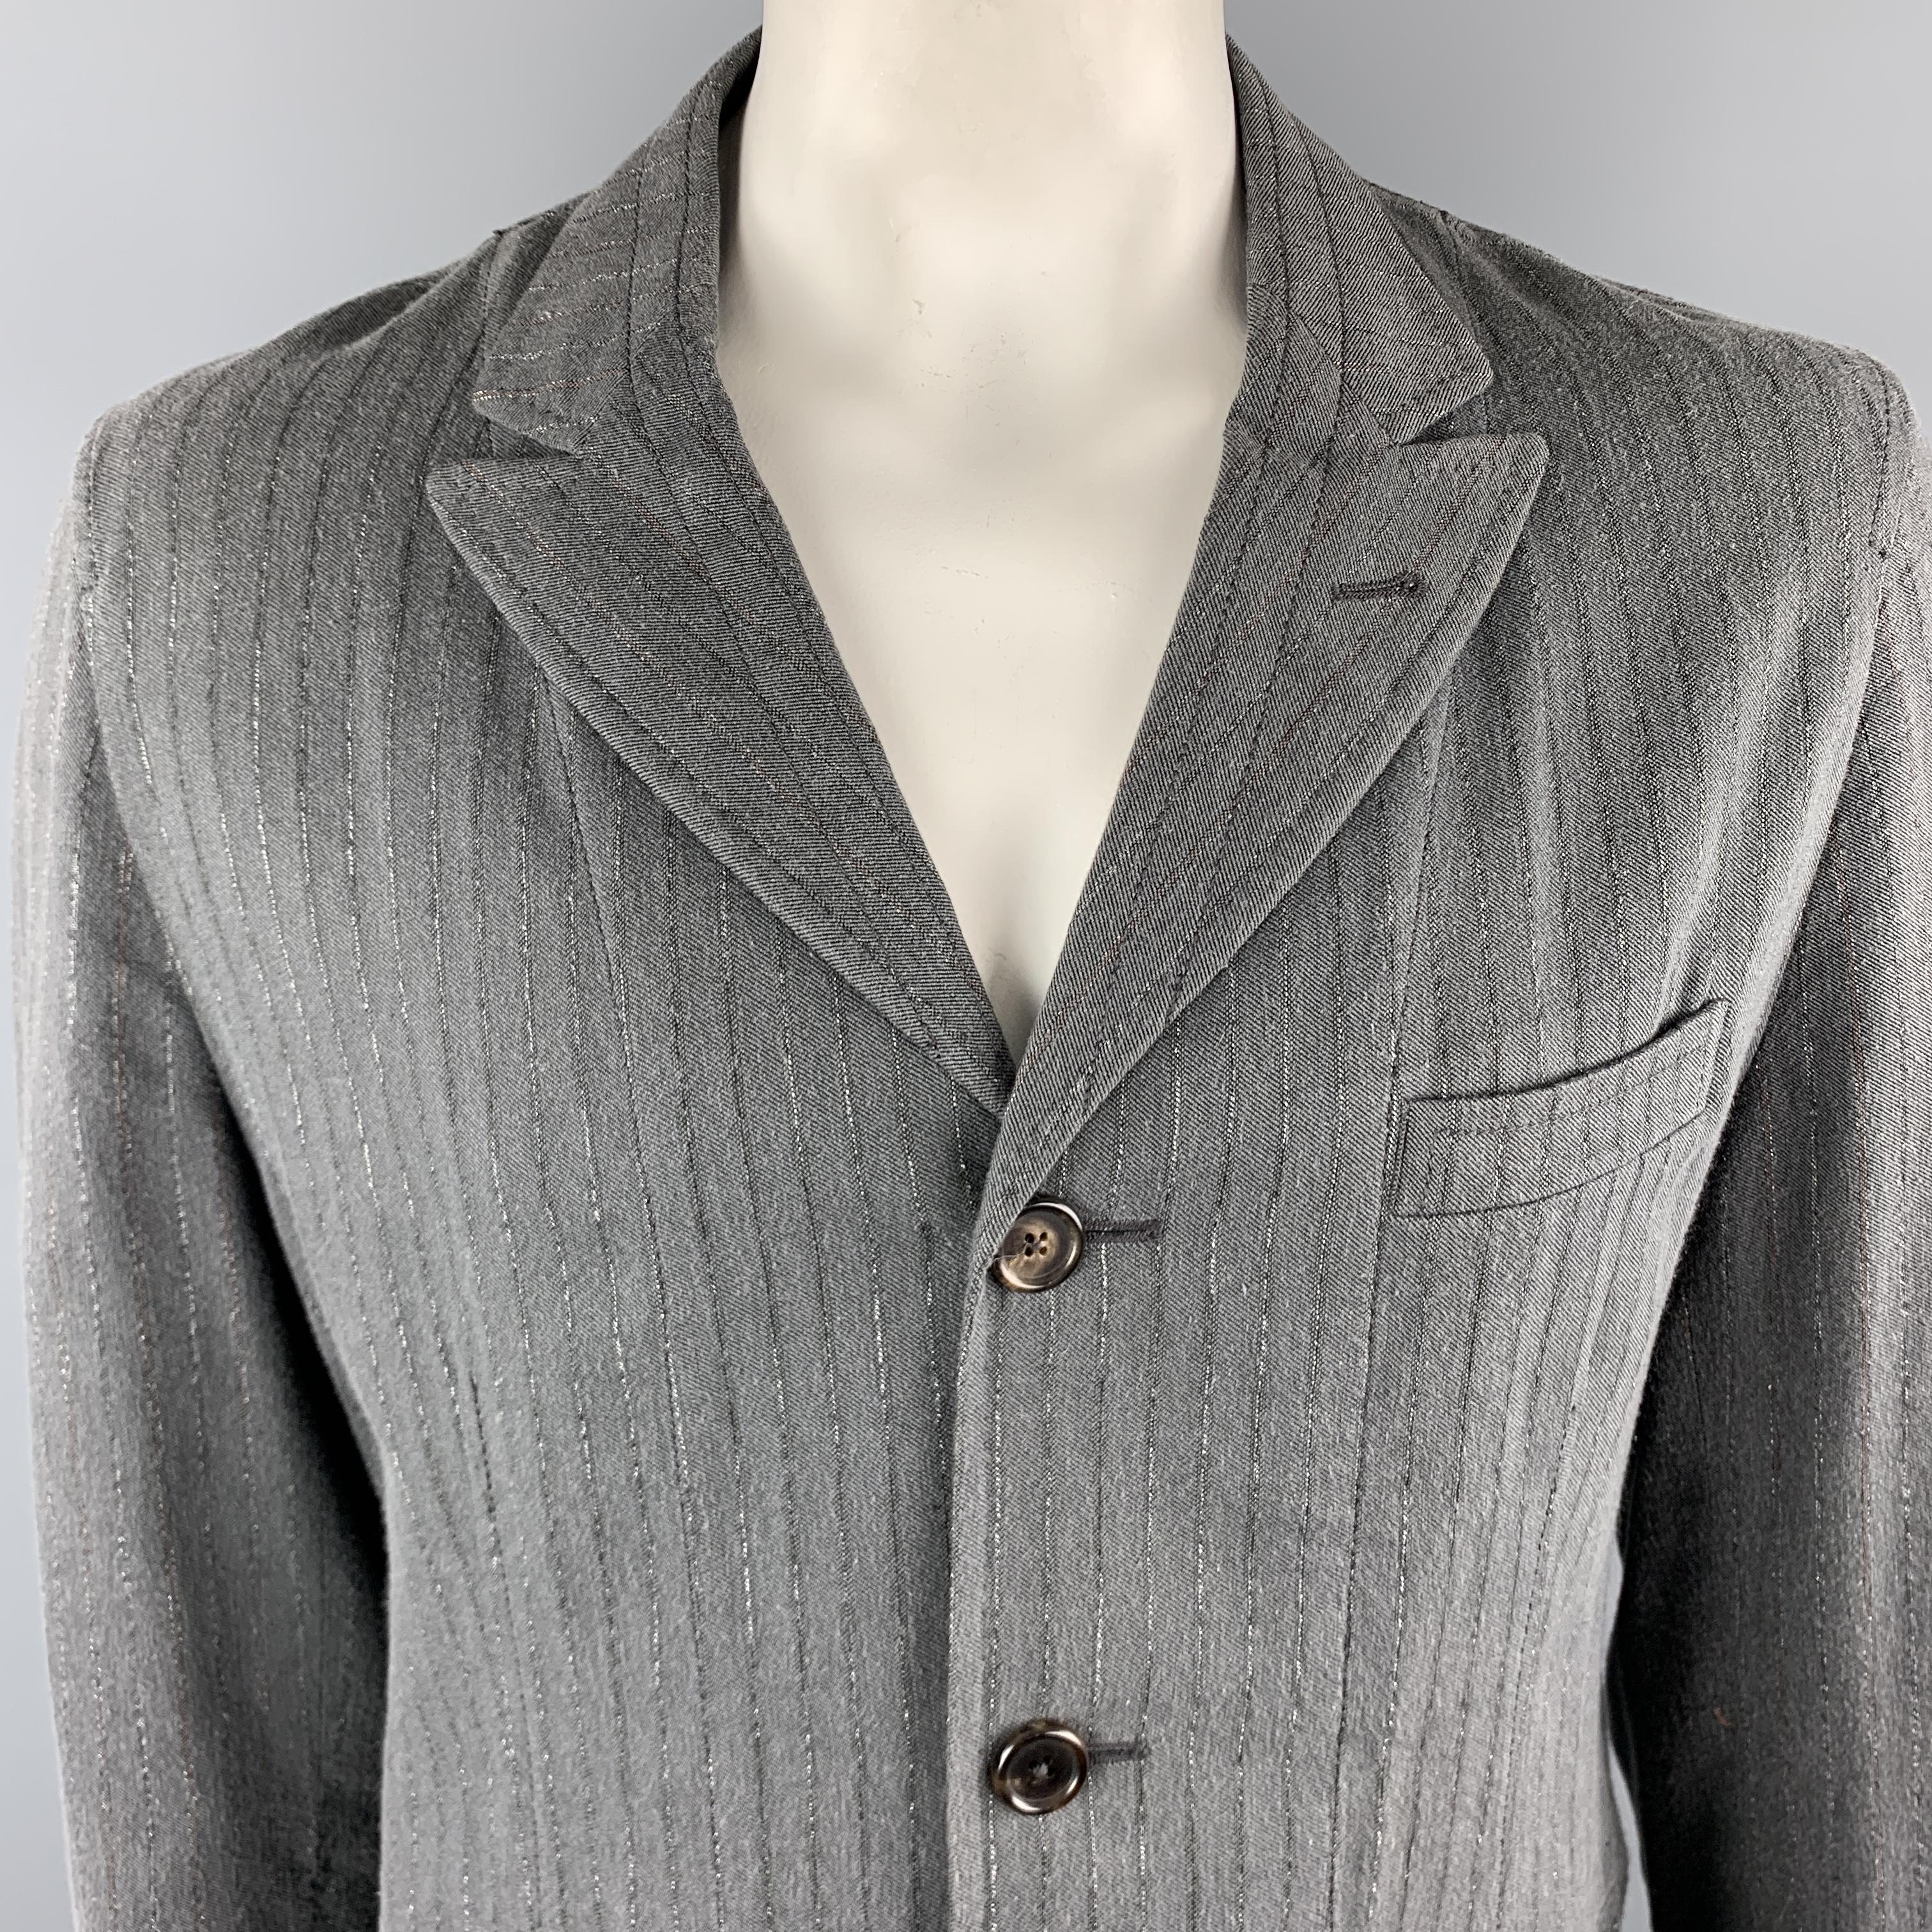 ANN DEMEULEMEESTER Jacket comes in a gray striped cotton blend featuring a peak lapel, contrast stitching, slit pockets, and a two button closure. Made in Portugal.

Excellent Pre-Owned Condition.
Marked: XL

Measurements:

Shoulder: 18.5 in.